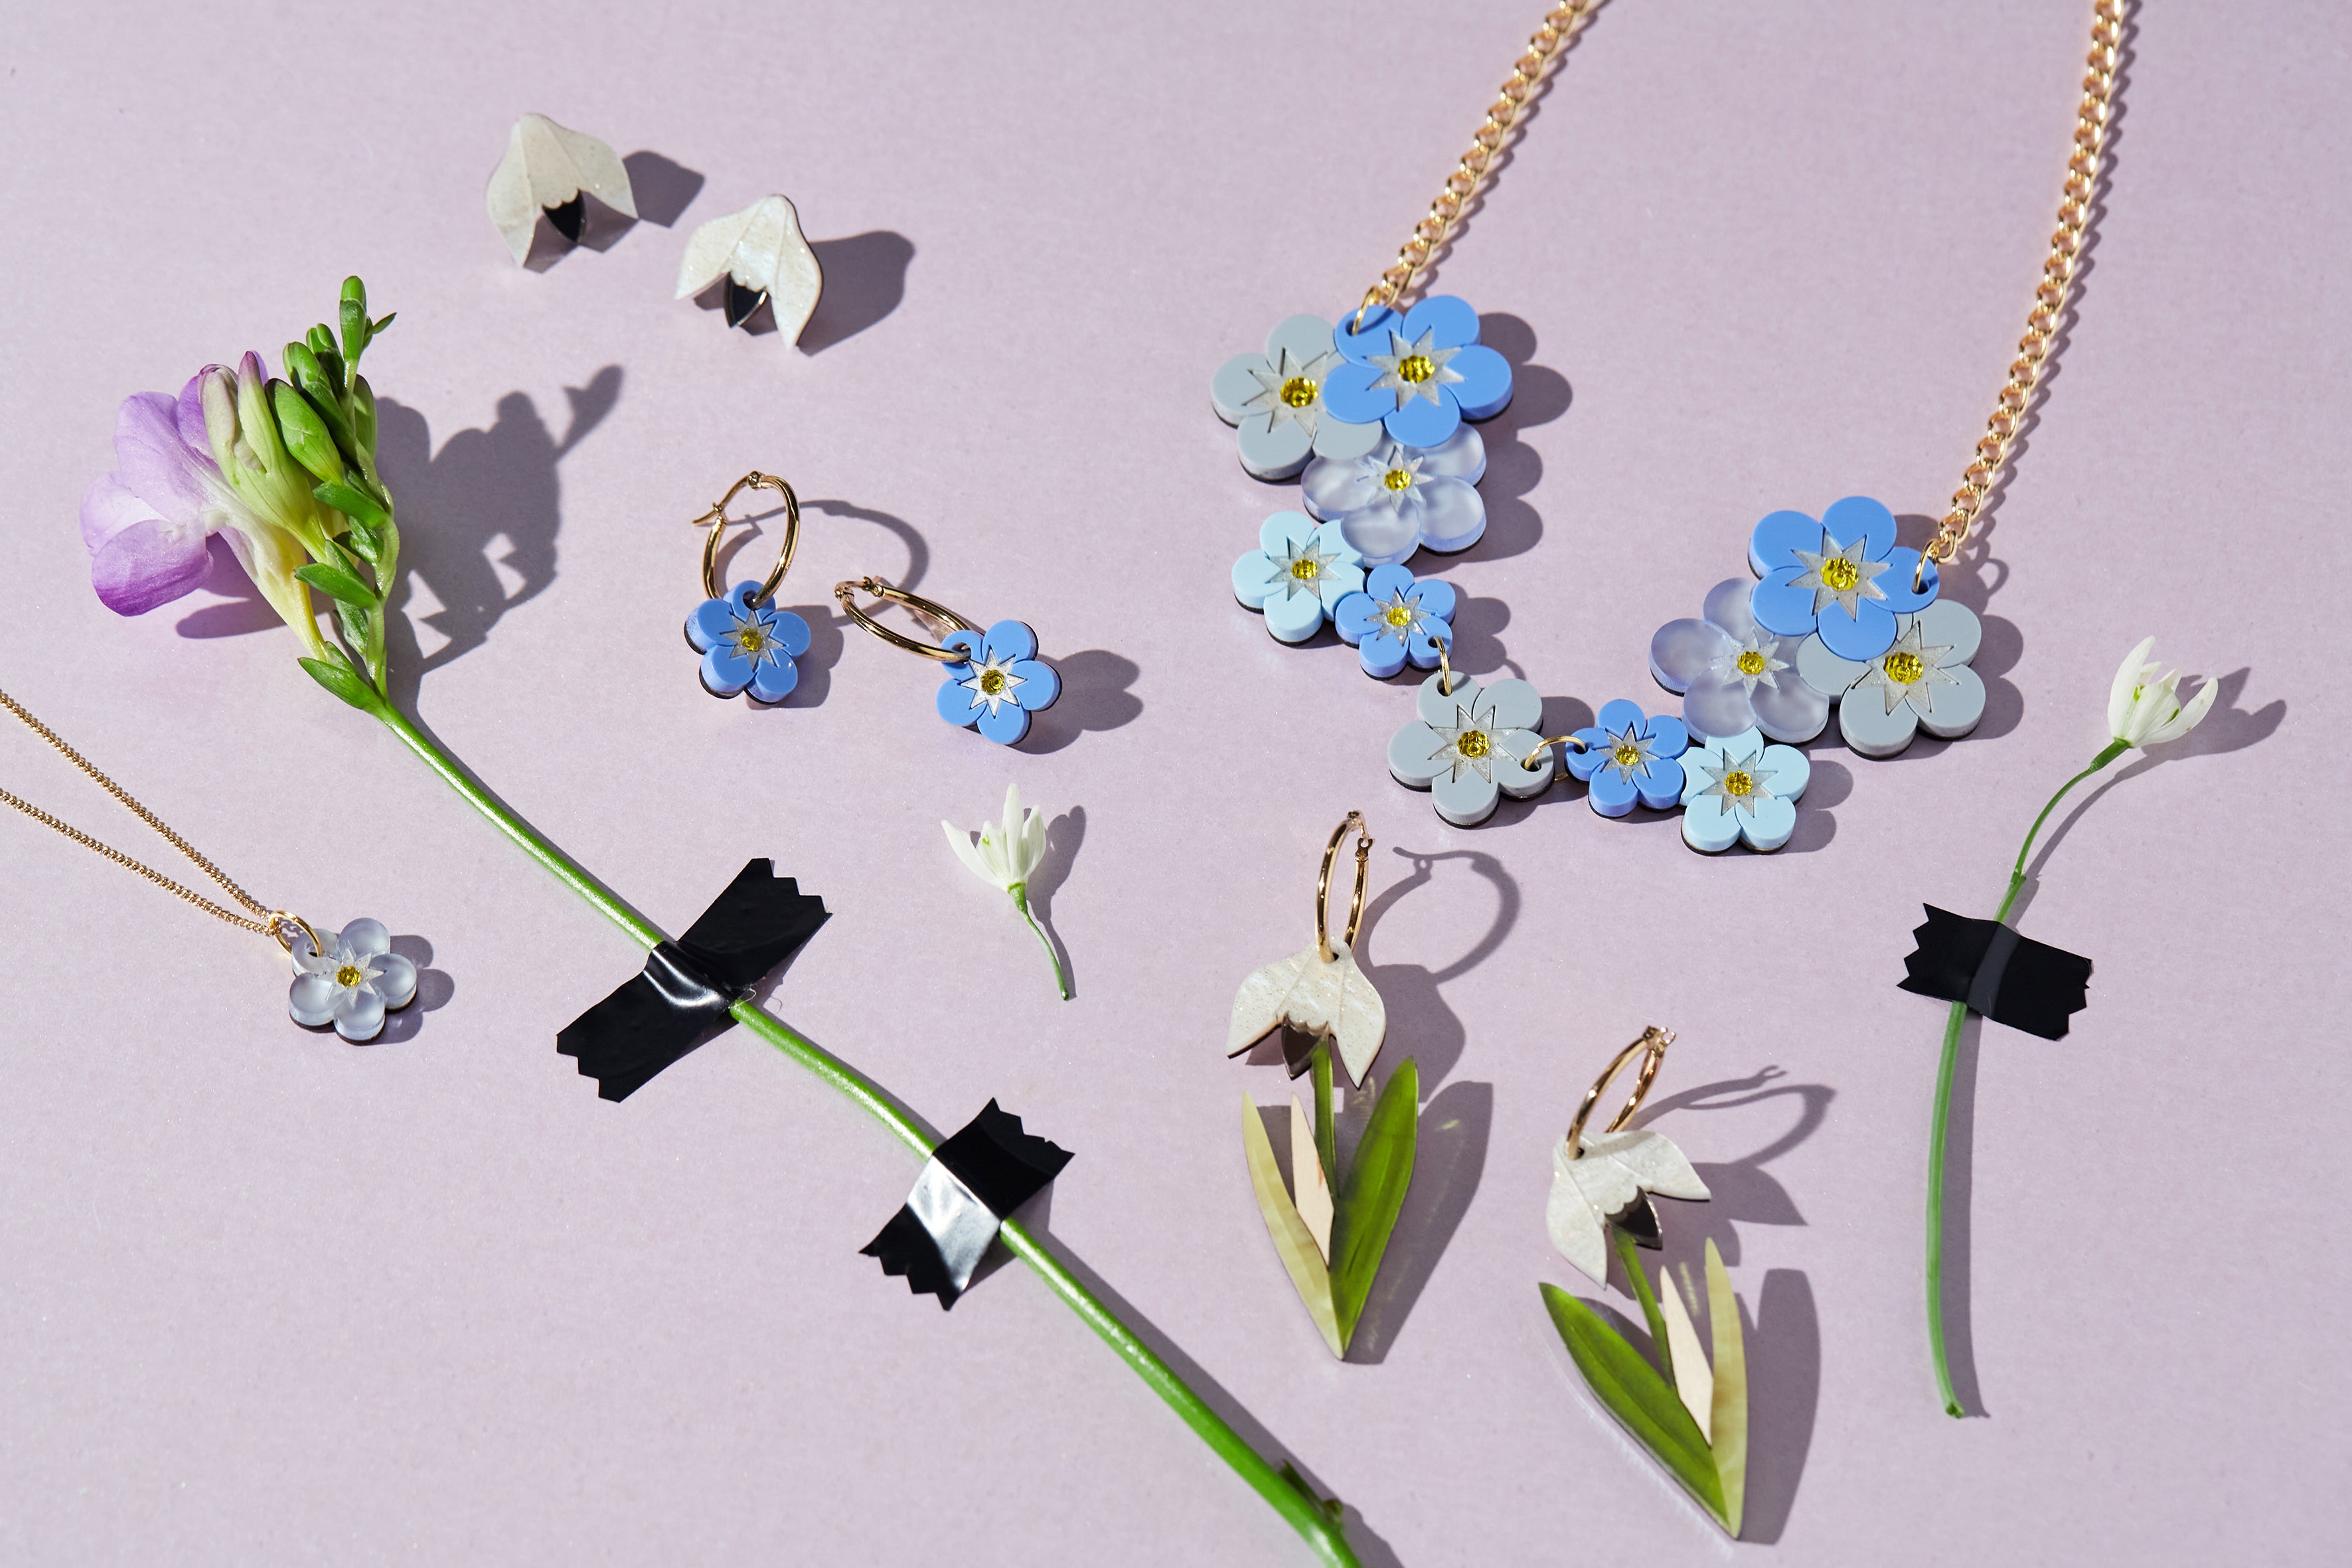 Forget Me Not Statement Brooch